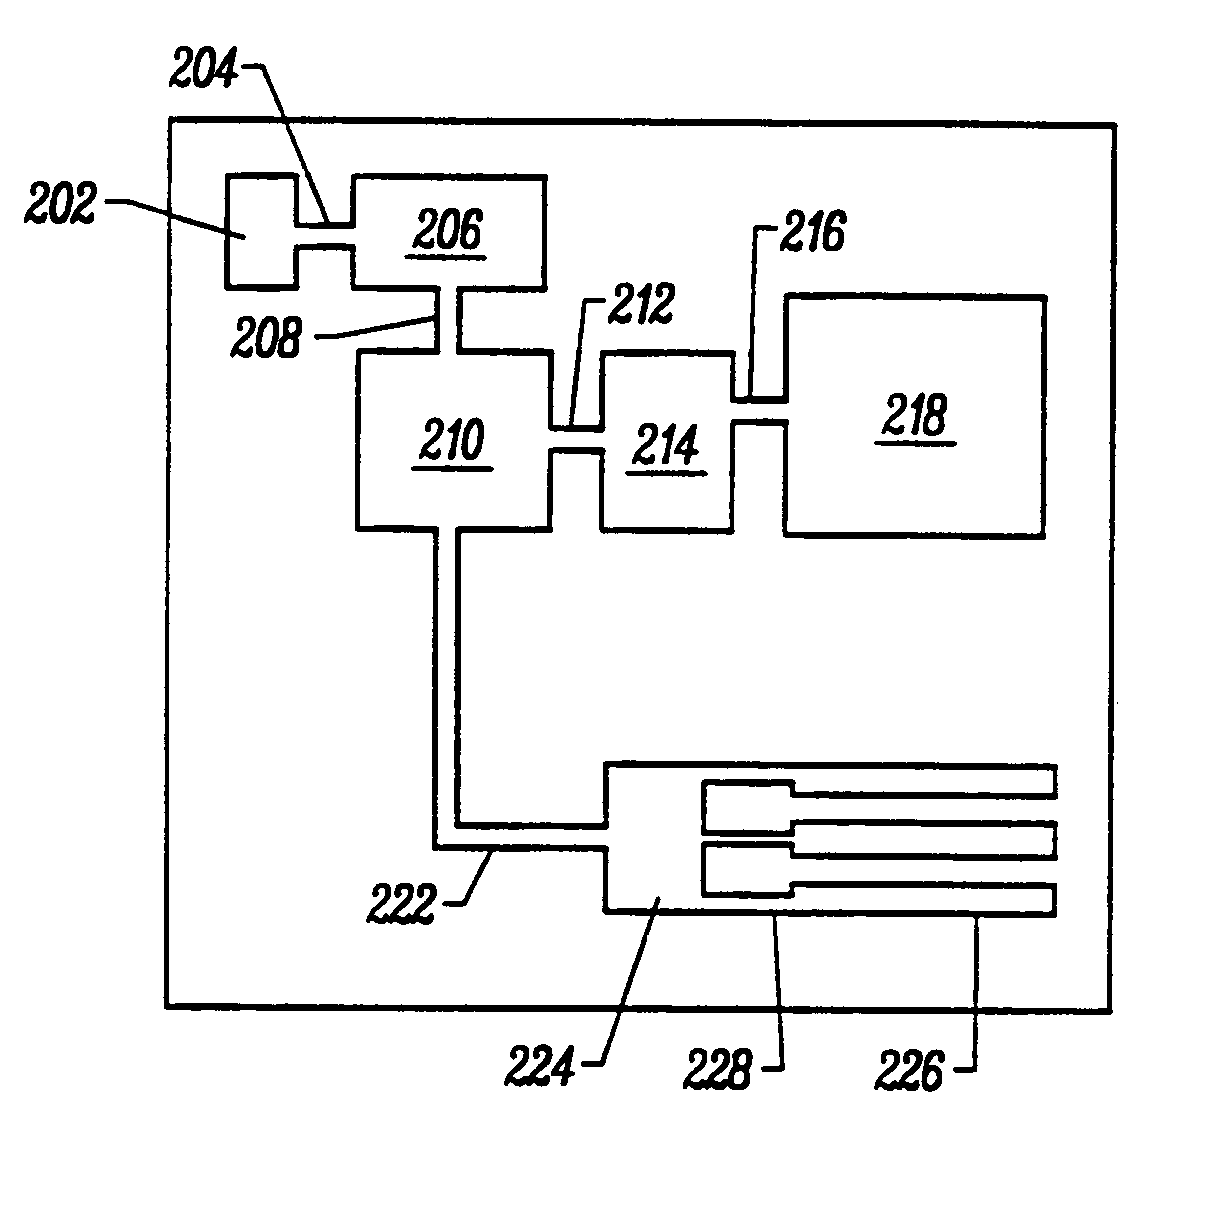 Integrated nucleic acid diagnostic device